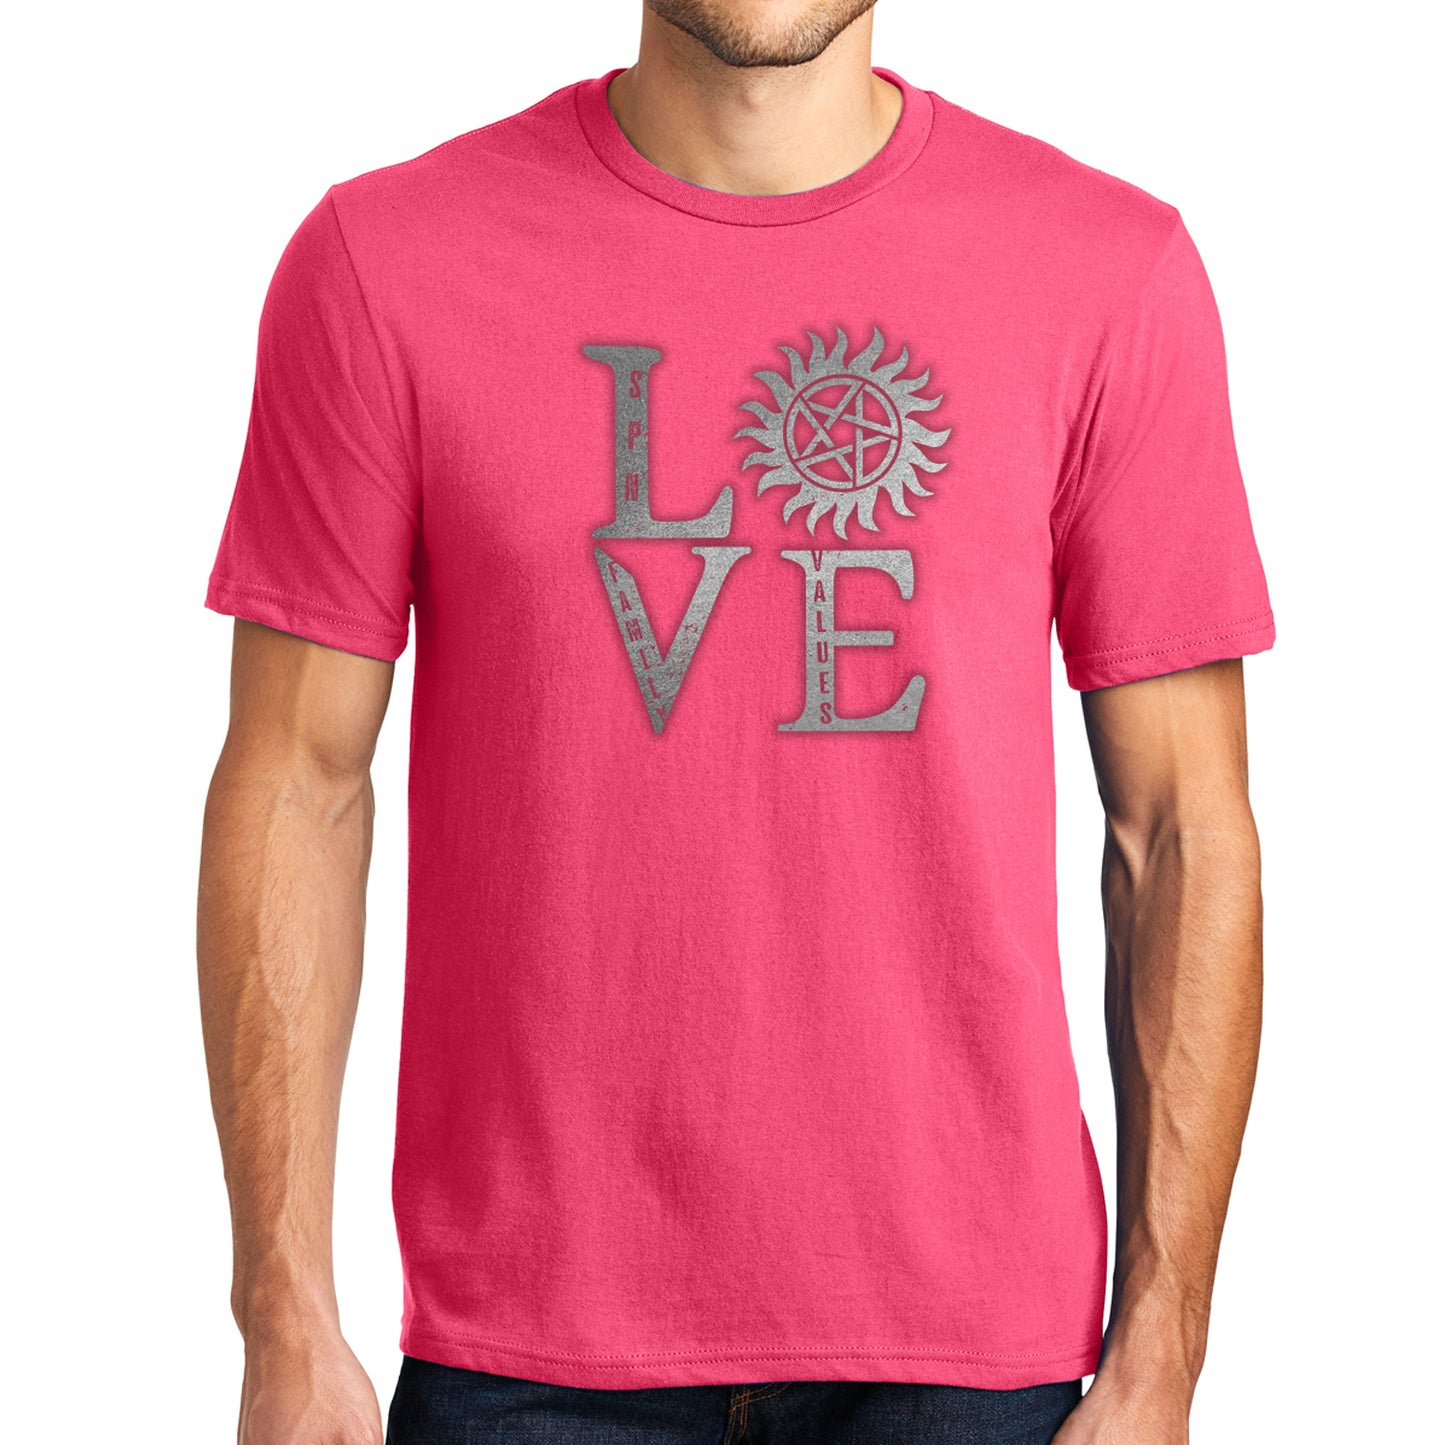 A male model wearing a pink t-shirt, against a white background. The front of the shirt has silver text saying "love," with the "O" replaced by the anti-possession symbol.